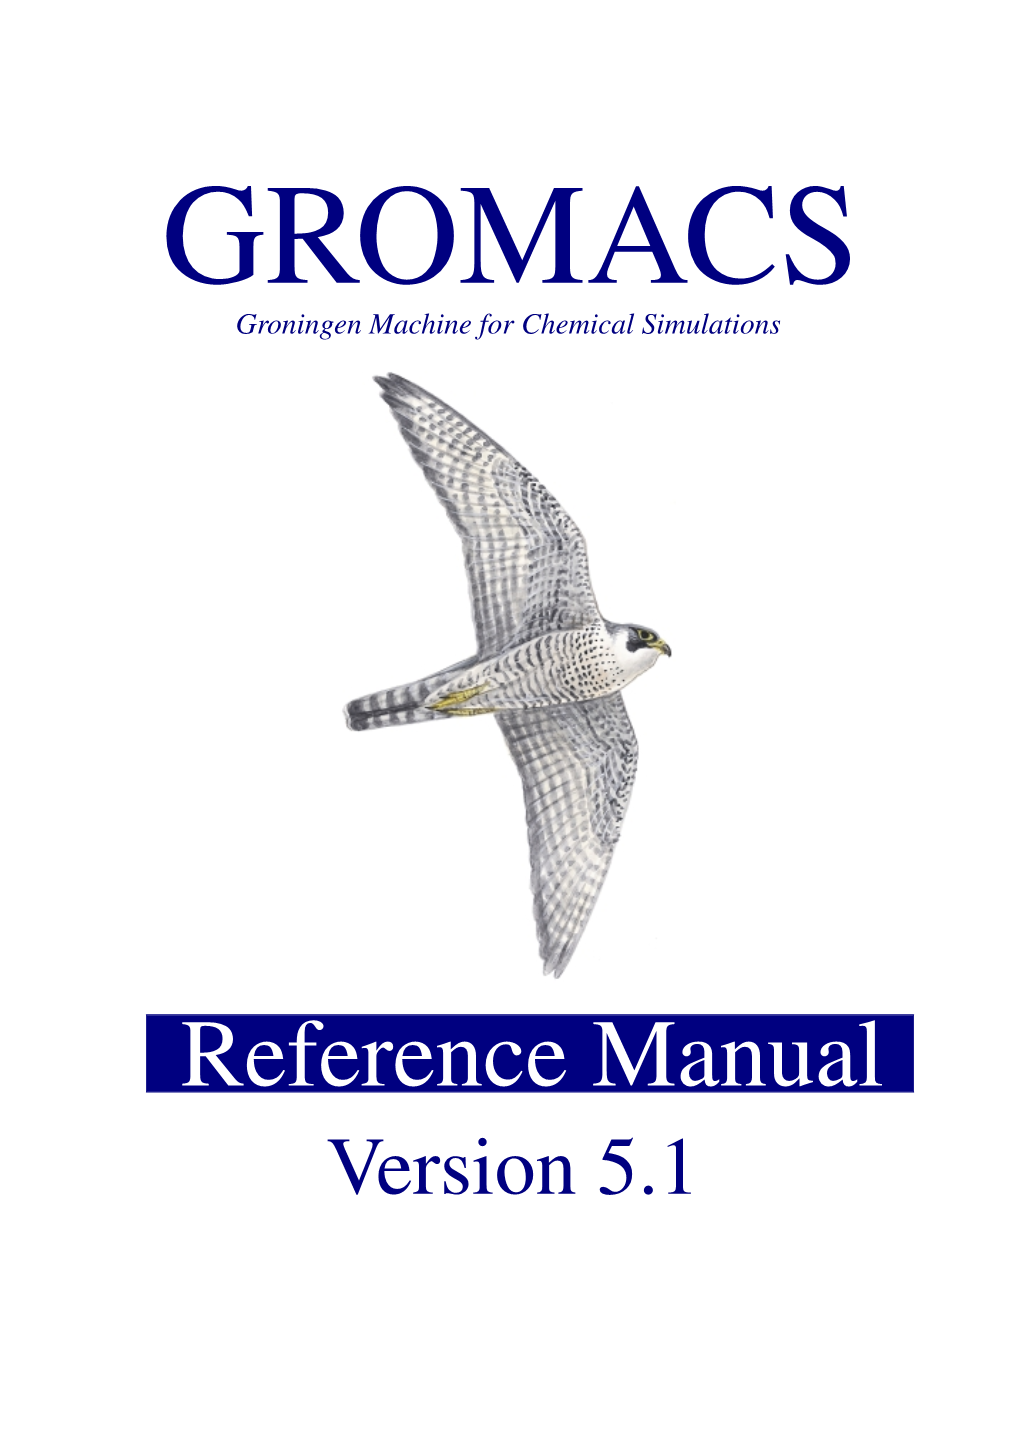 Reference Manual Version 5.1